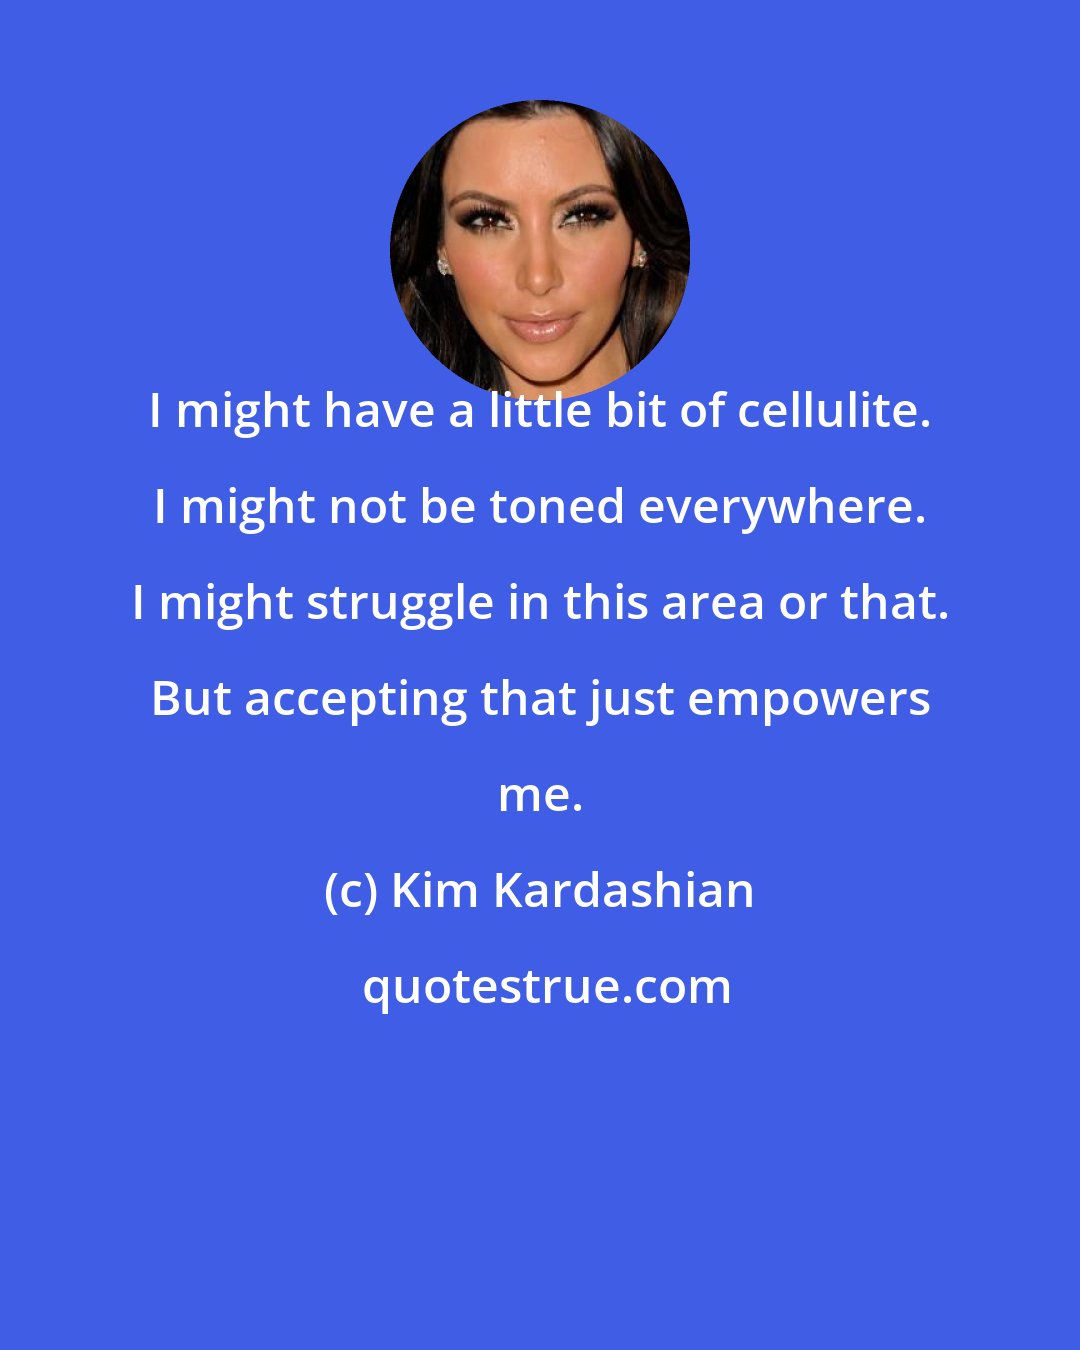 Kim Kardashian: I might have a little bit of cellulite. I might not be toned everywhere. I might struggle in this area or that. But accepting that just empowers me.